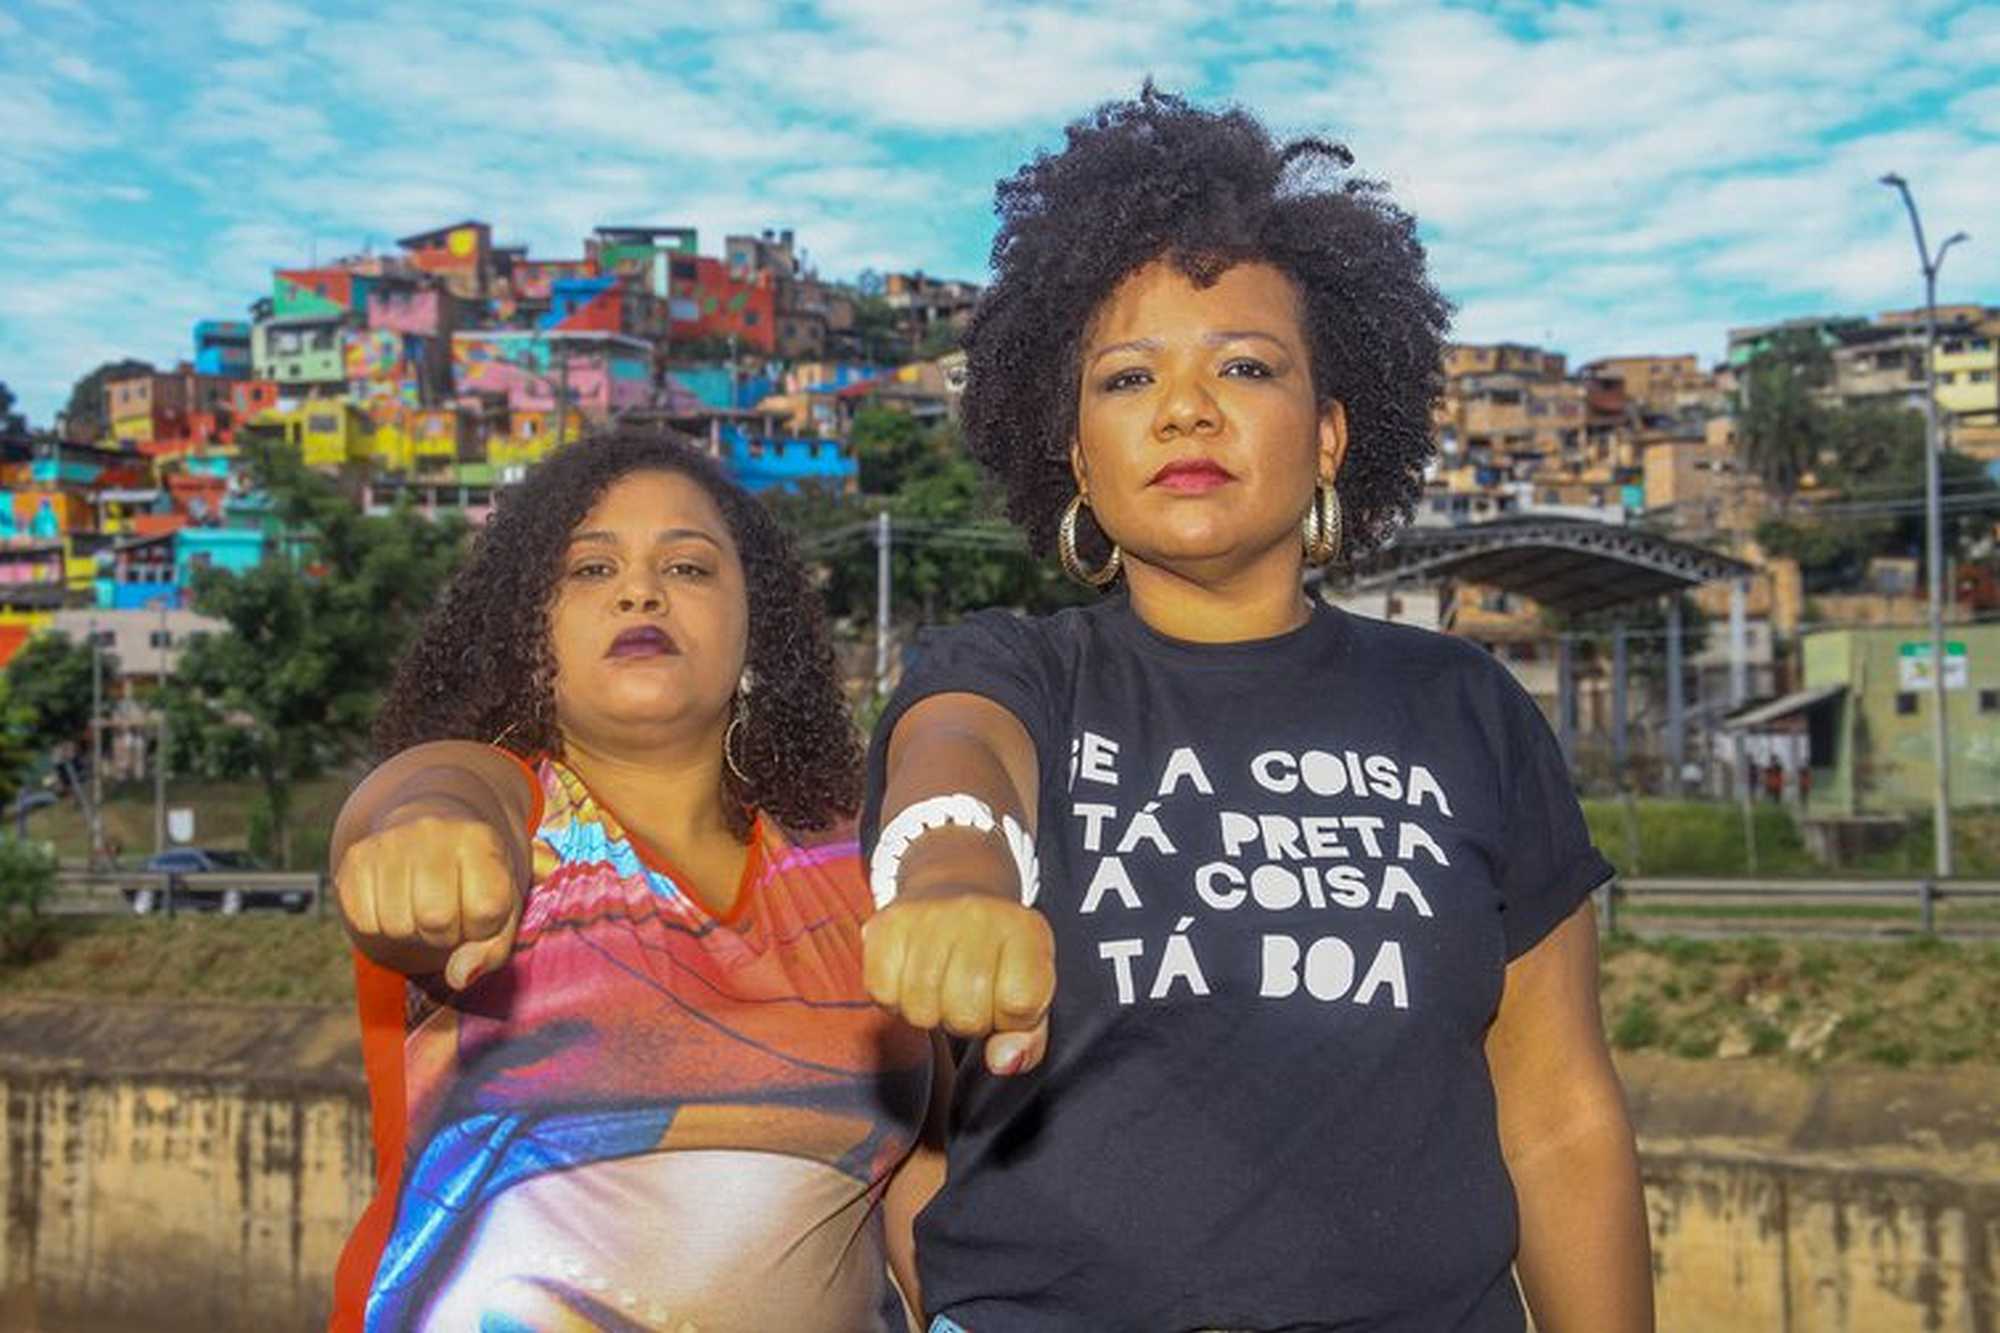 Taina Rosa (left) and Lauana Nara, candidates in this week's municipal elections, want more Black women in office. | Credit: Dokttor Bhu Bhu and Allan Calisto